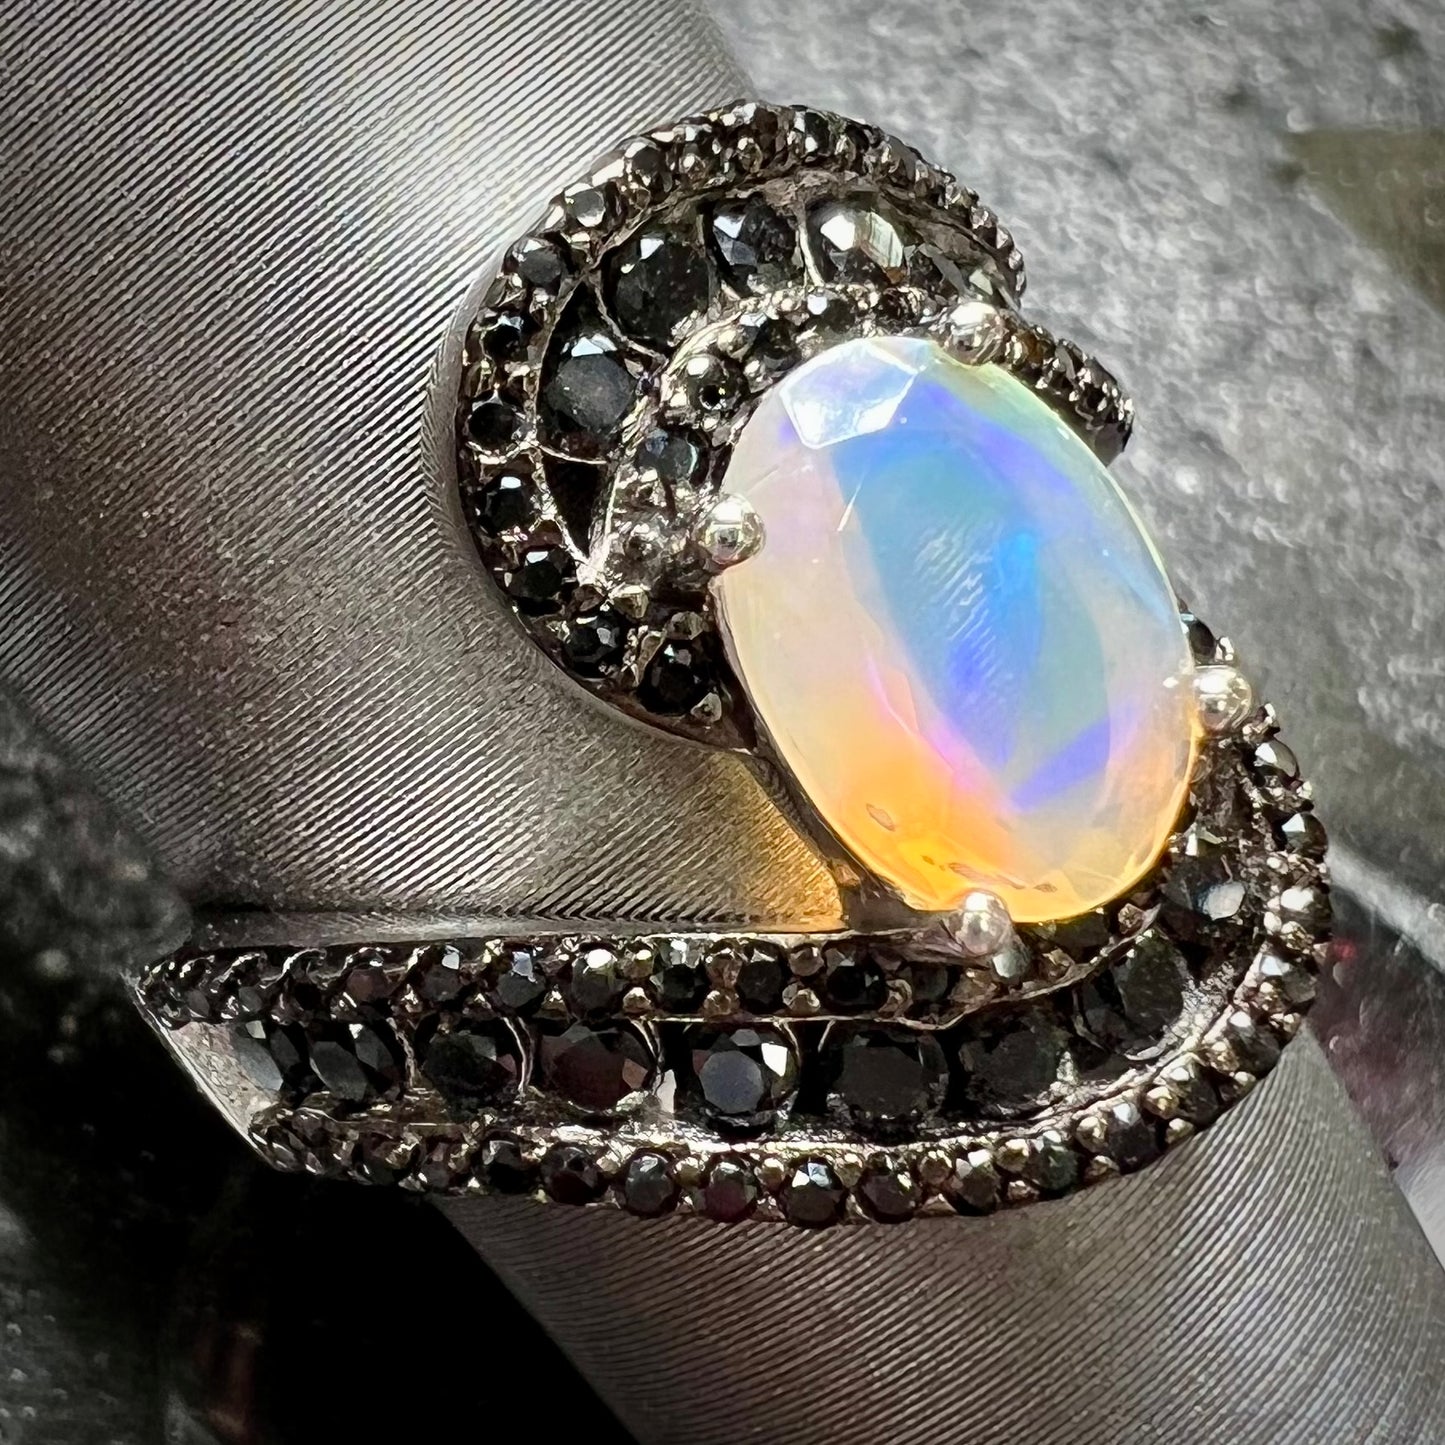 A sterling silver ring set with round black spinel stones and an oval cut, faceted Ethiopian opal.